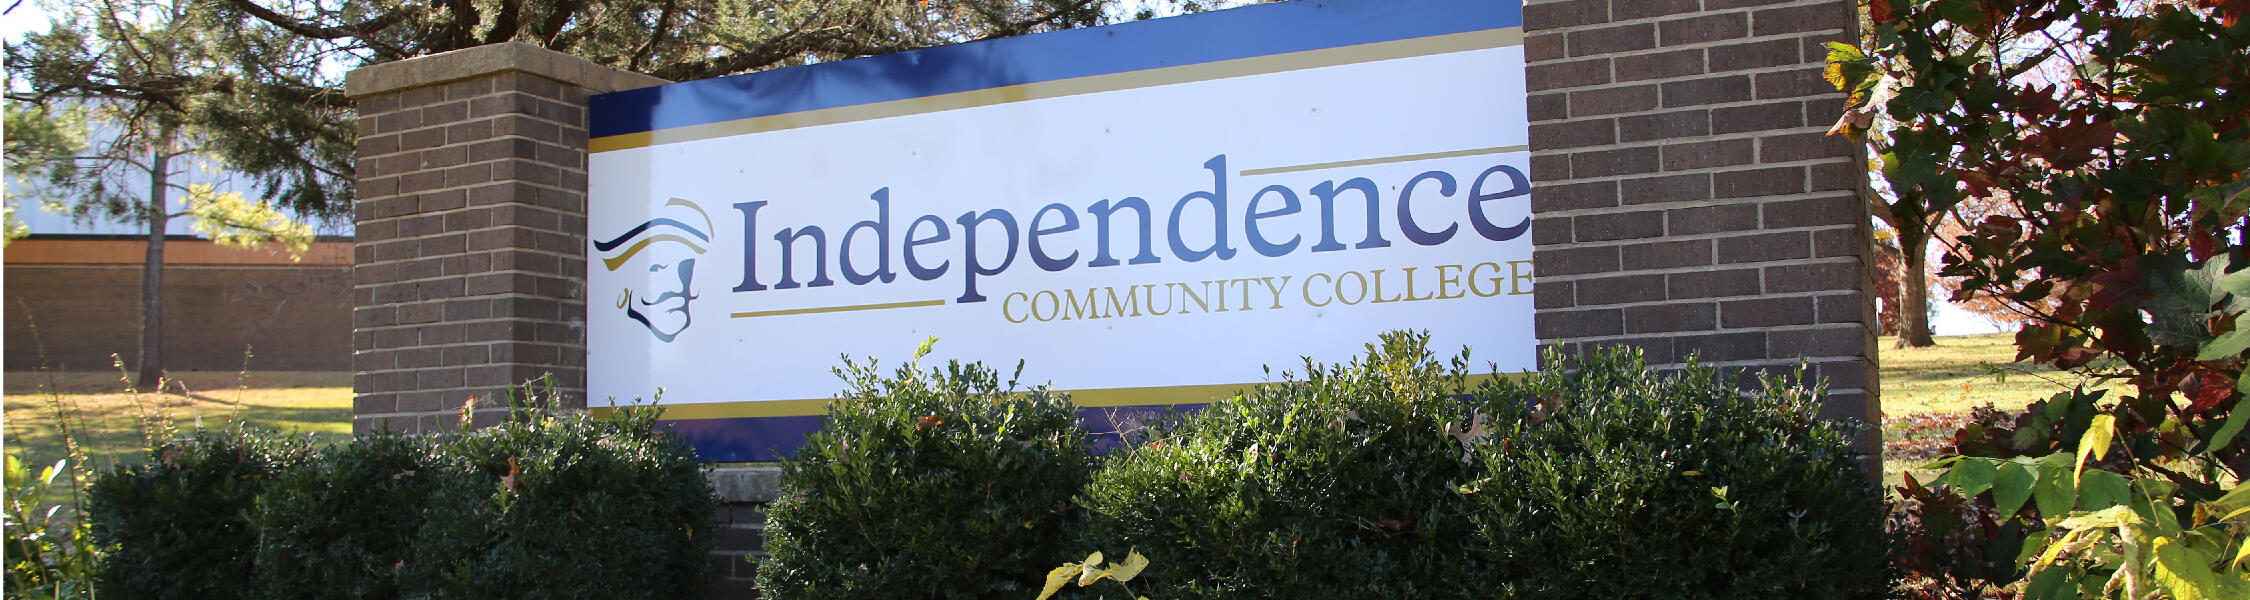 Independence community college sign